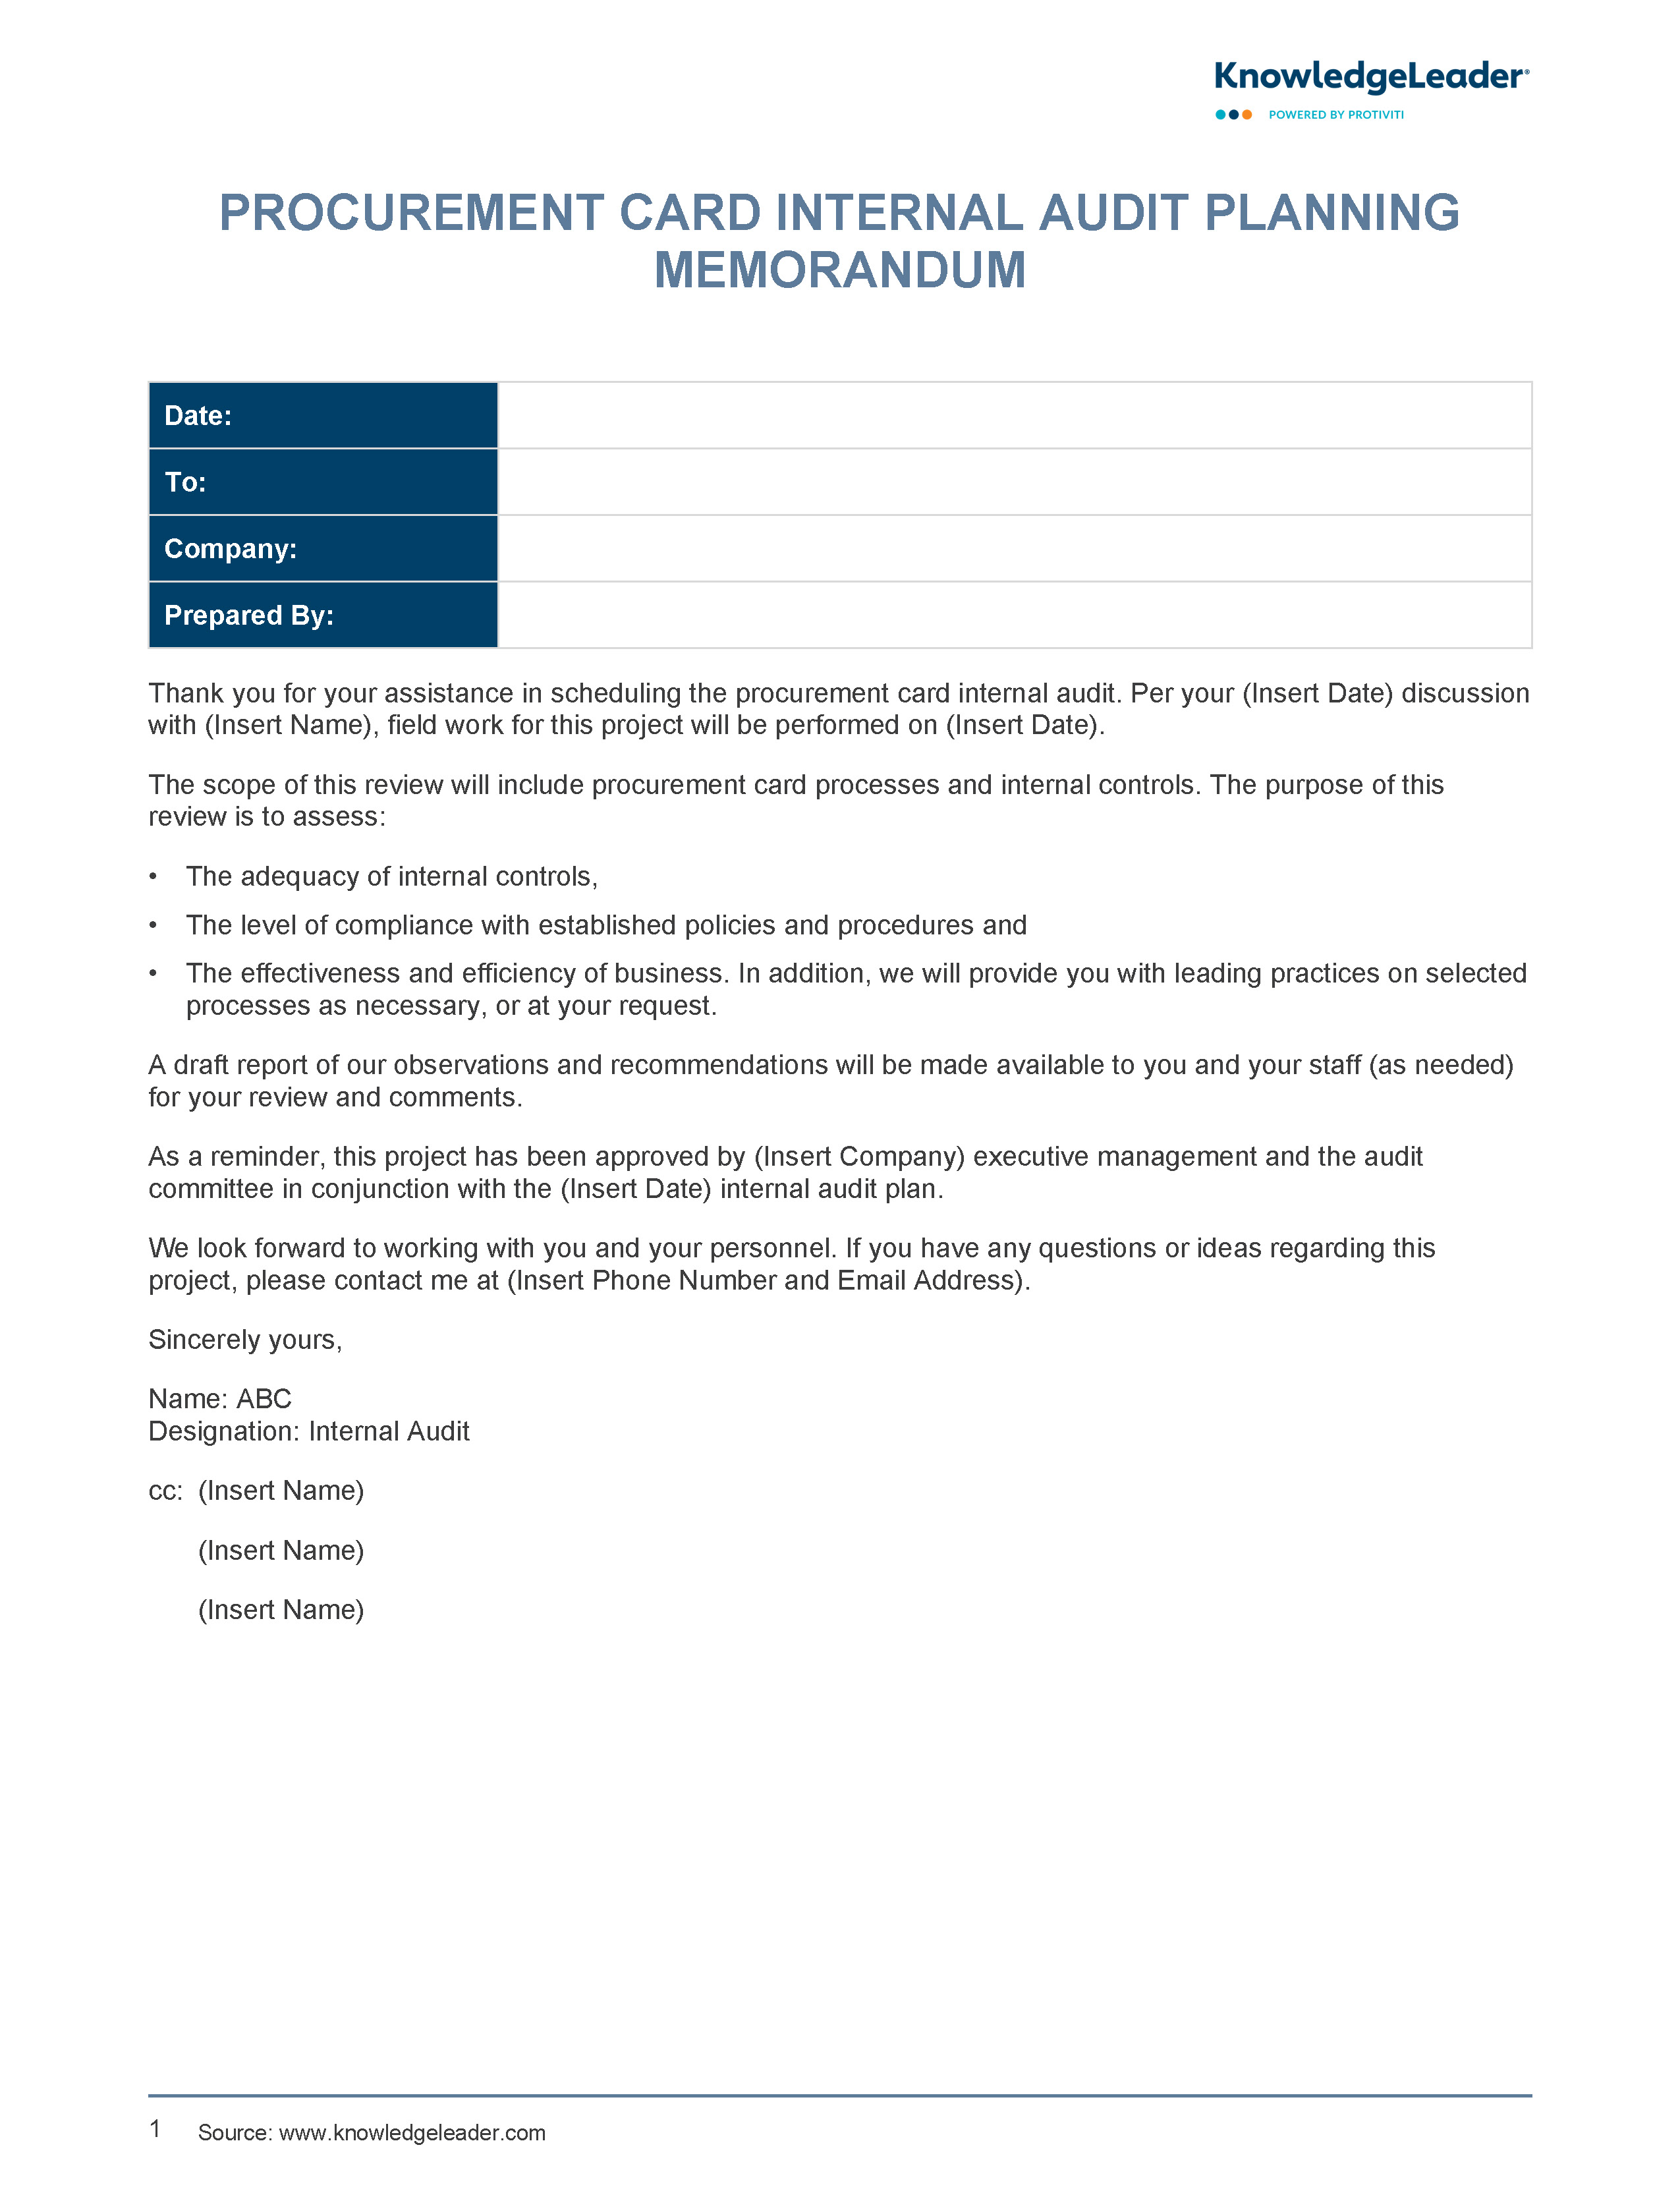 Screenshot of the first page of Procurement Card Audit Memo